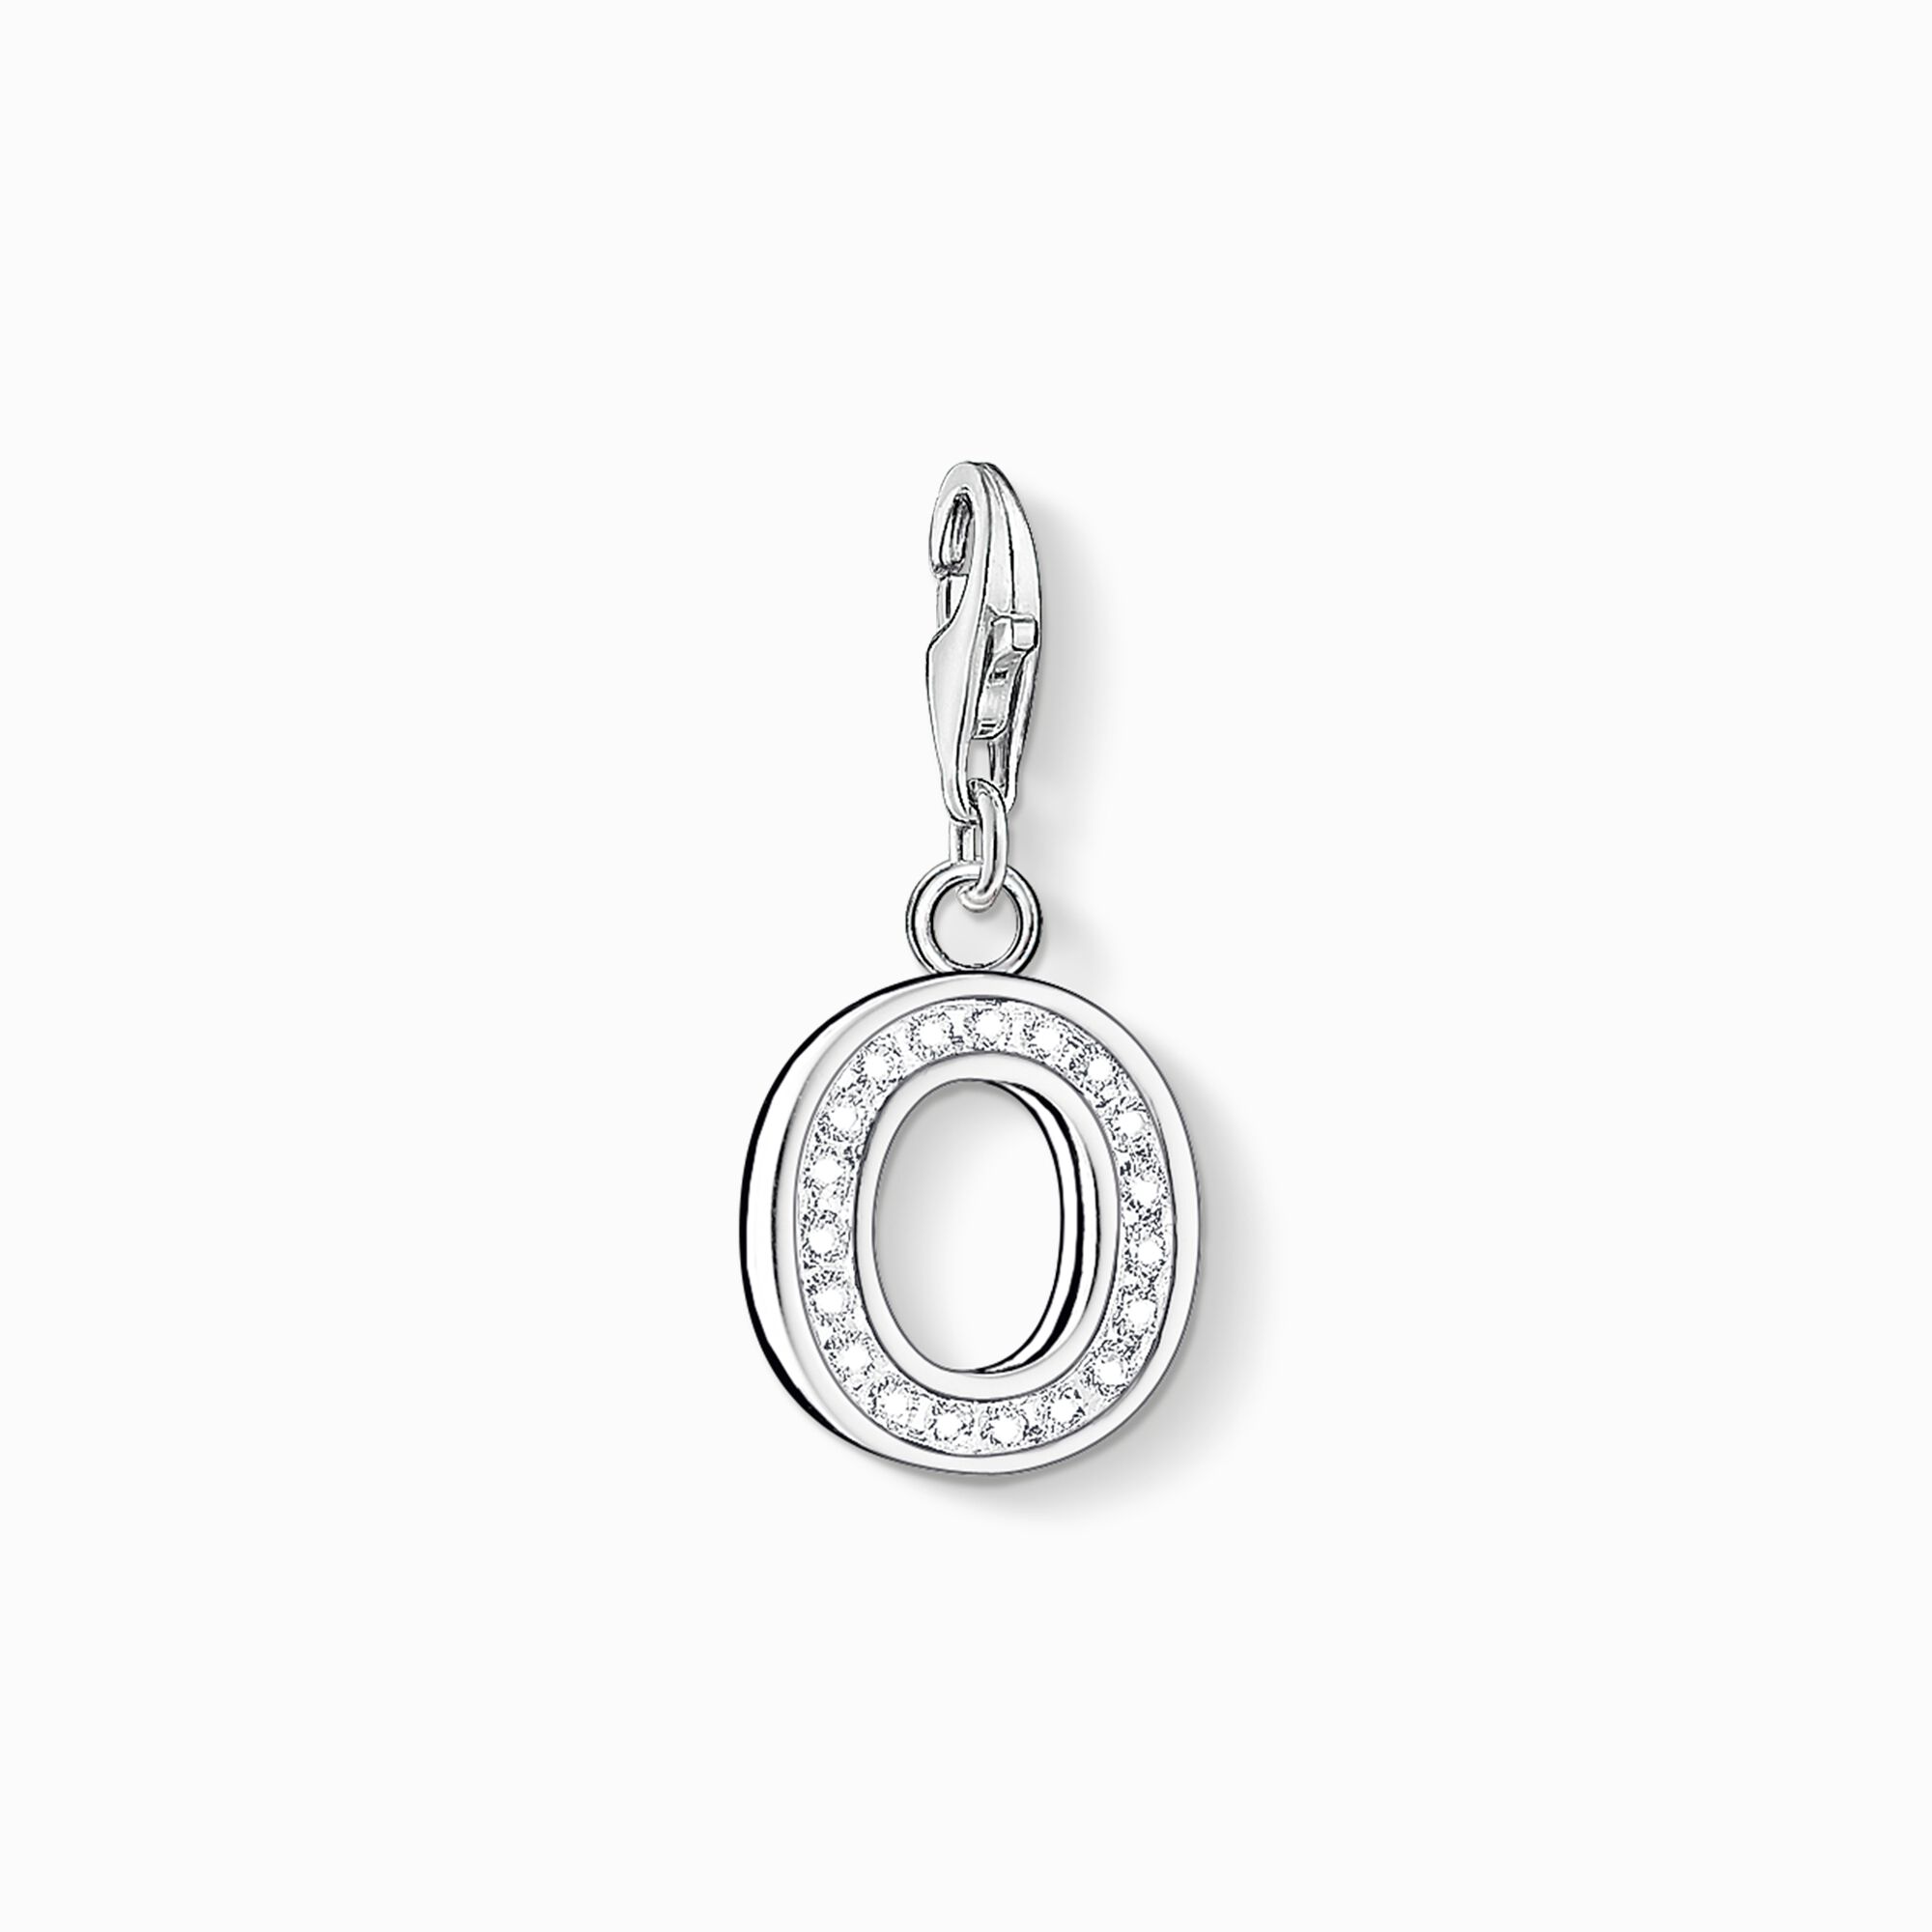 Charm pendant letter O from the Charm Club collection in the THOMAS SABO online store